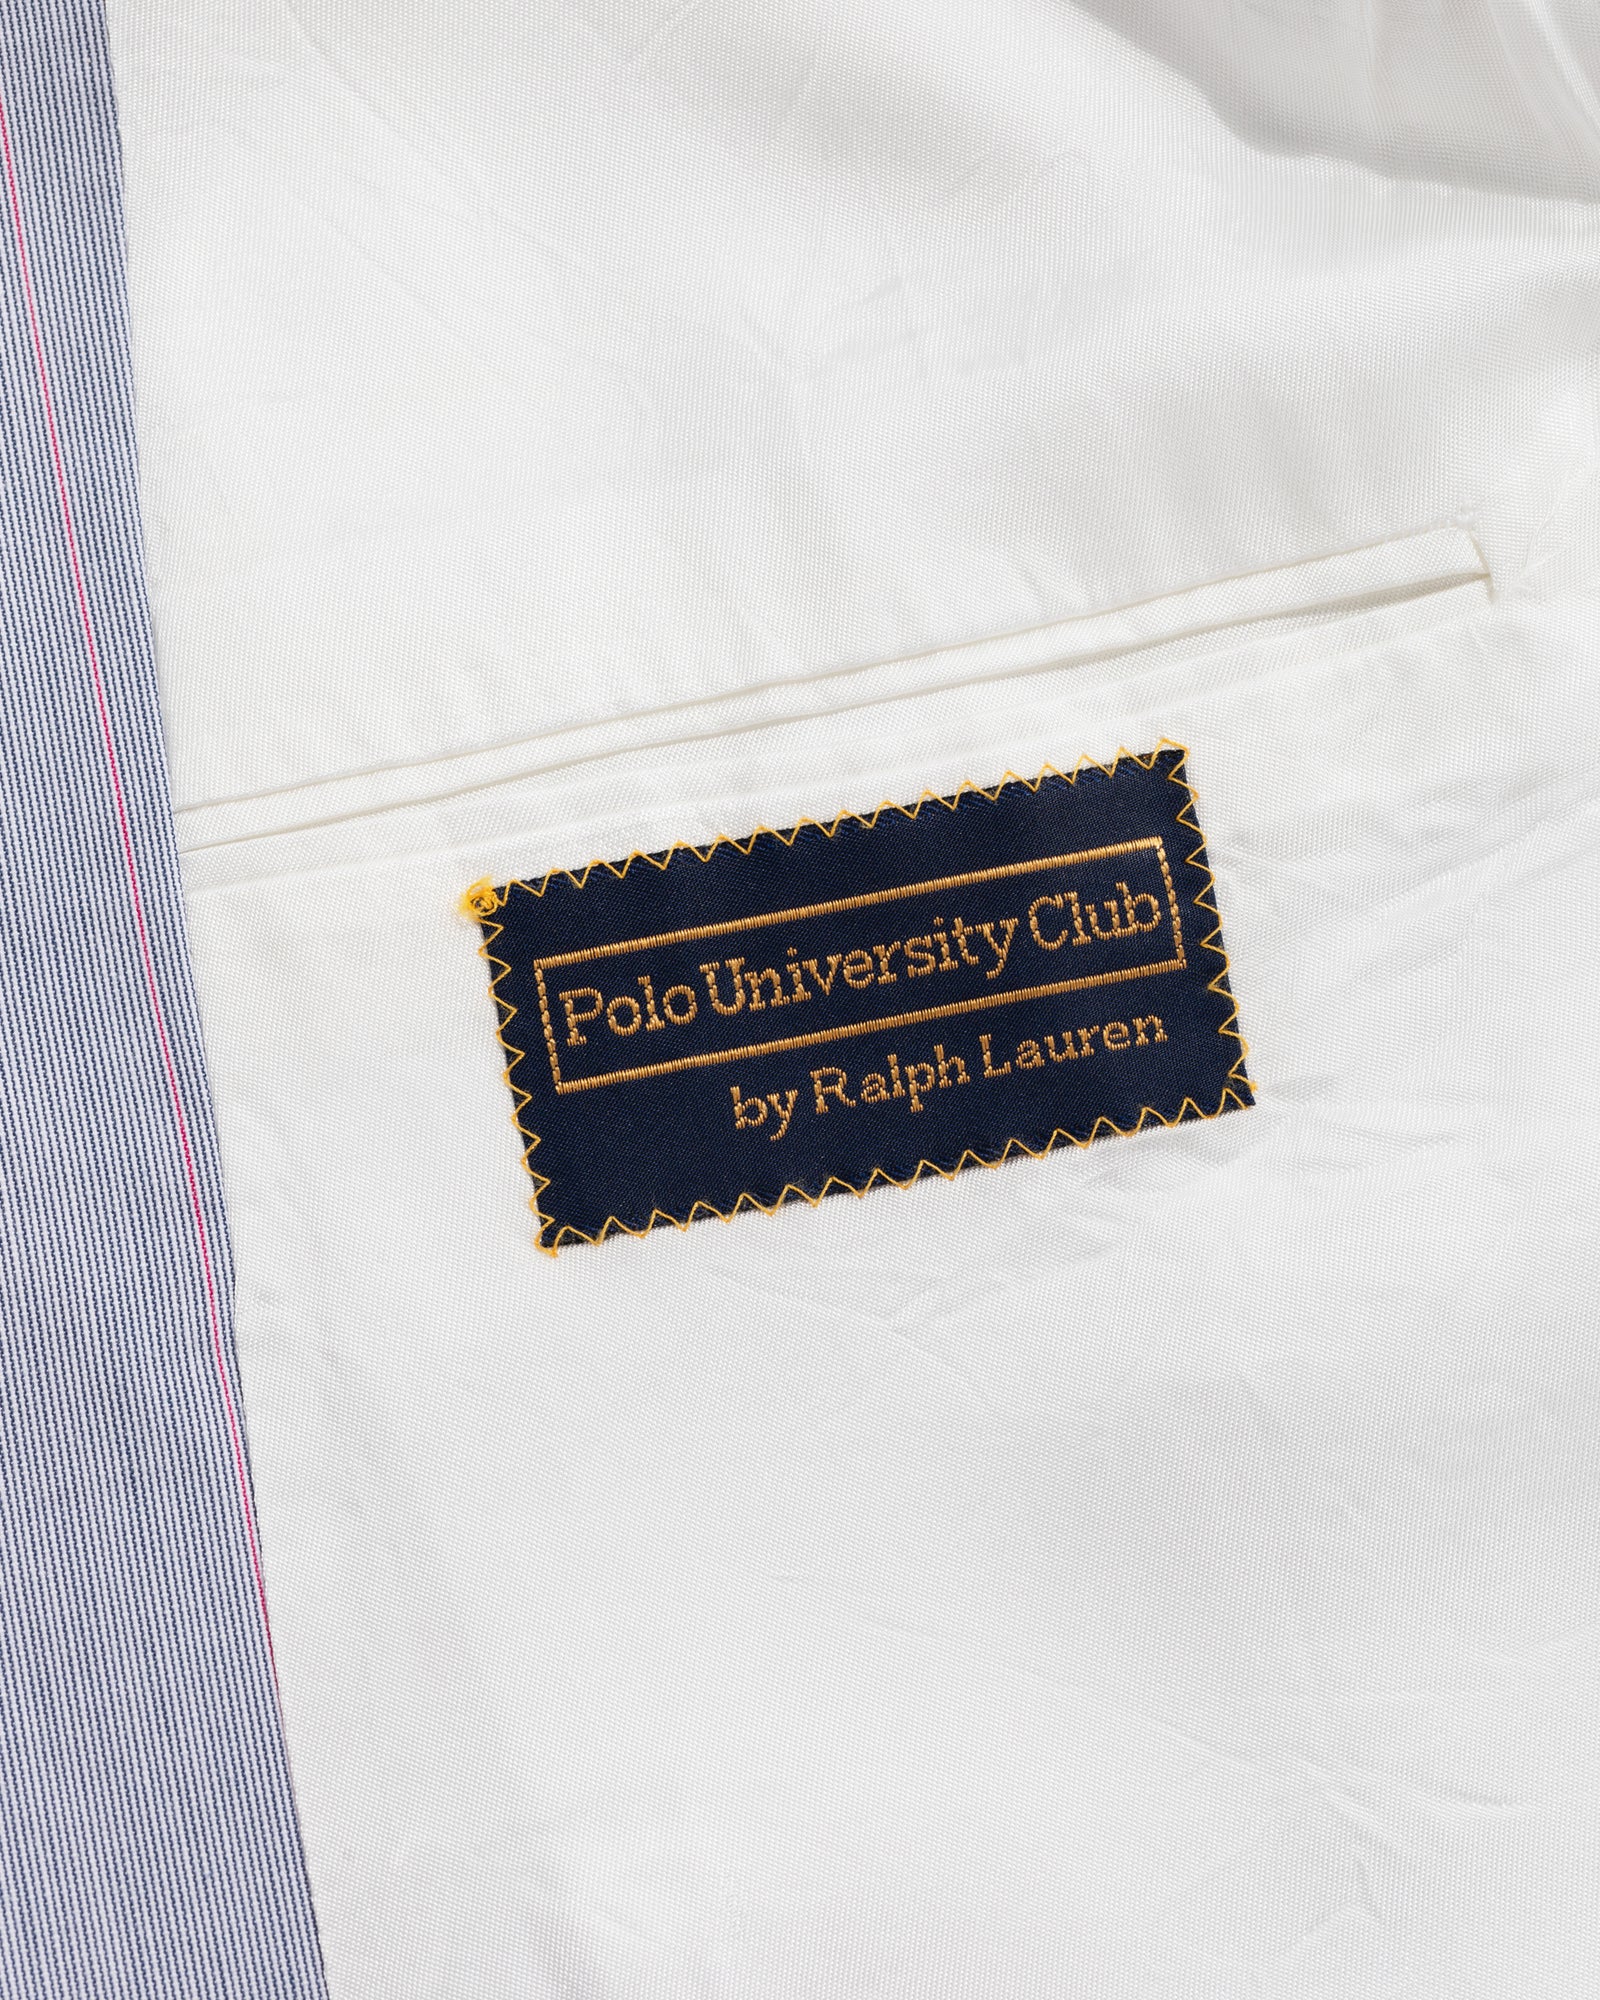 Vintage Polo University Club by Ralph Lauren Double-Breasted Suit